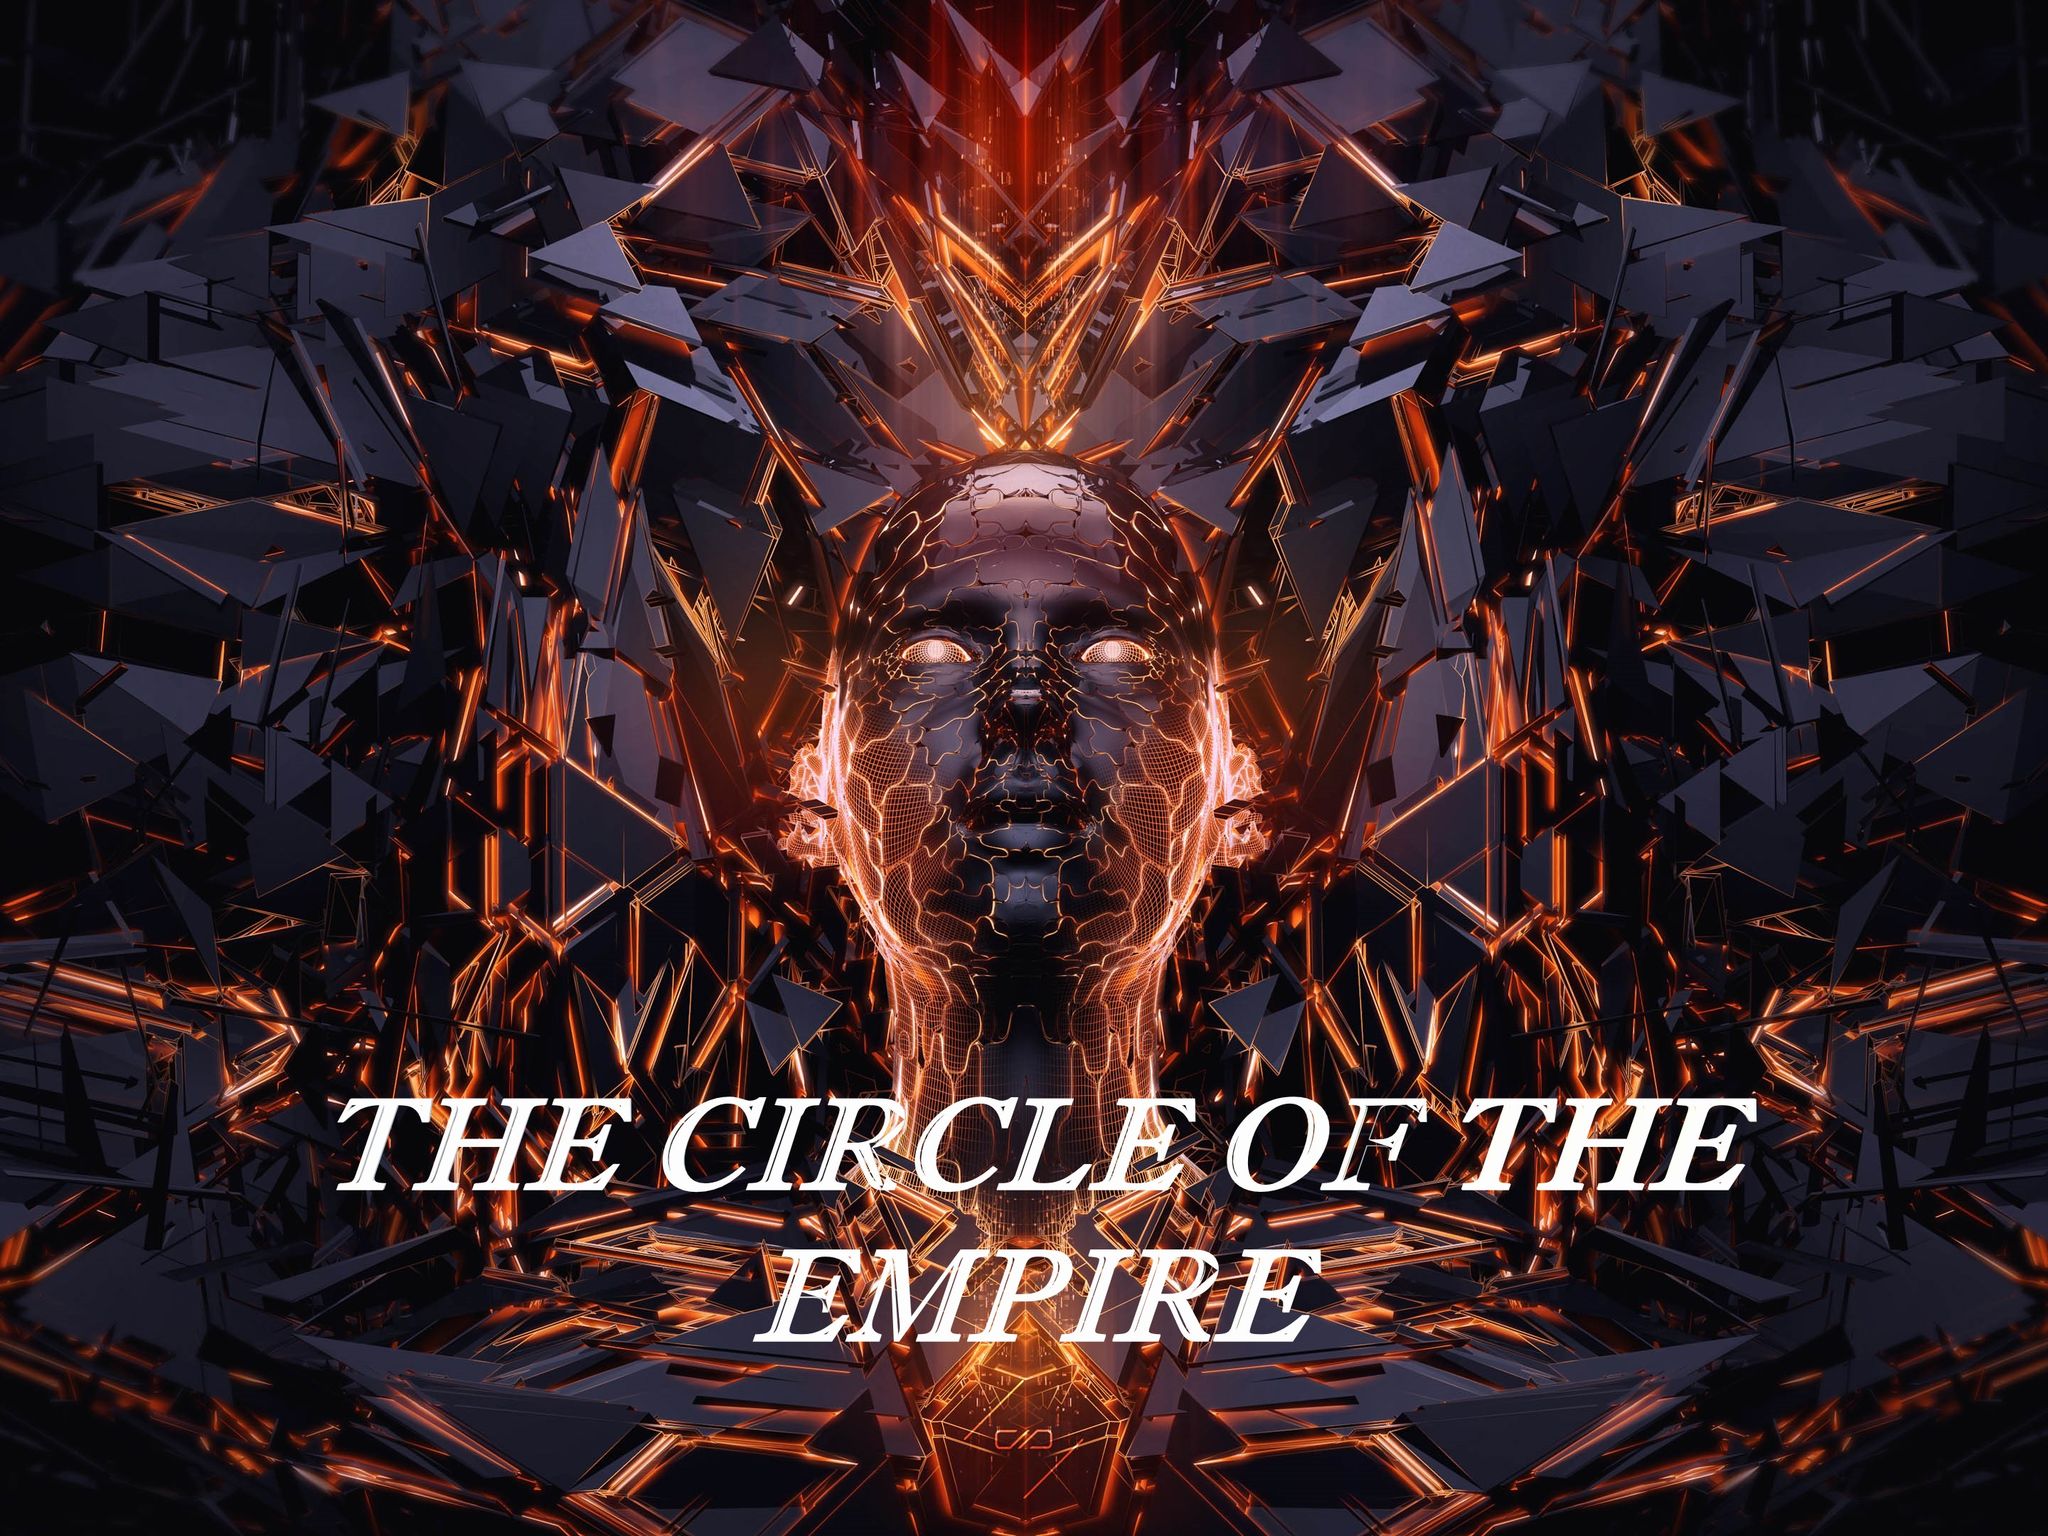 THE CIRCLE OF THE EMPIRE